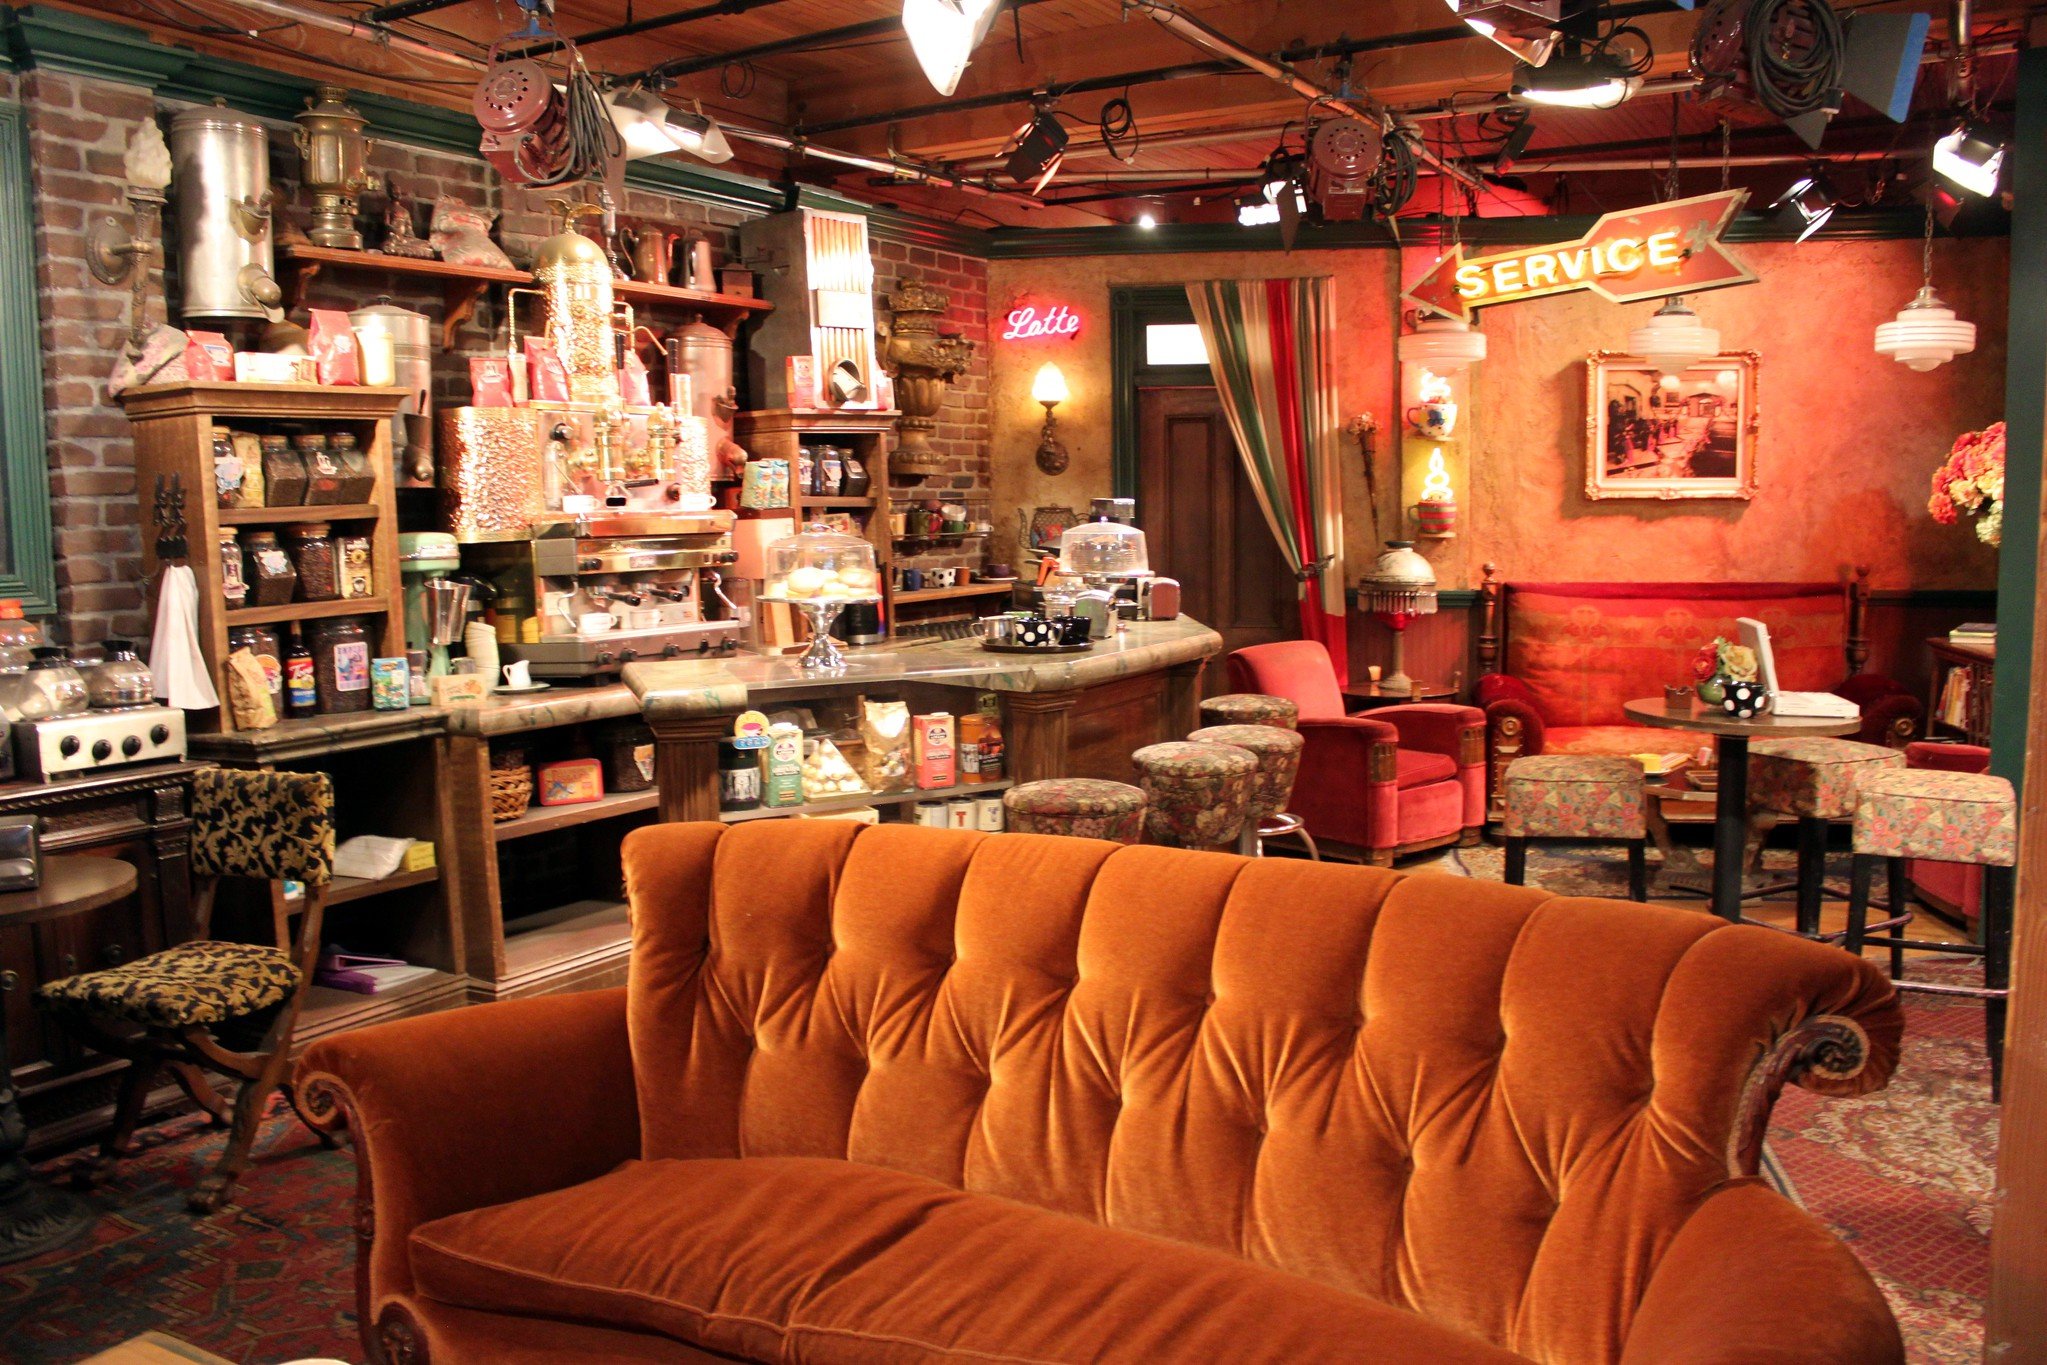 A photo of the famous sofa inside Central Perk coffee shop from the 'Friends' sitcom